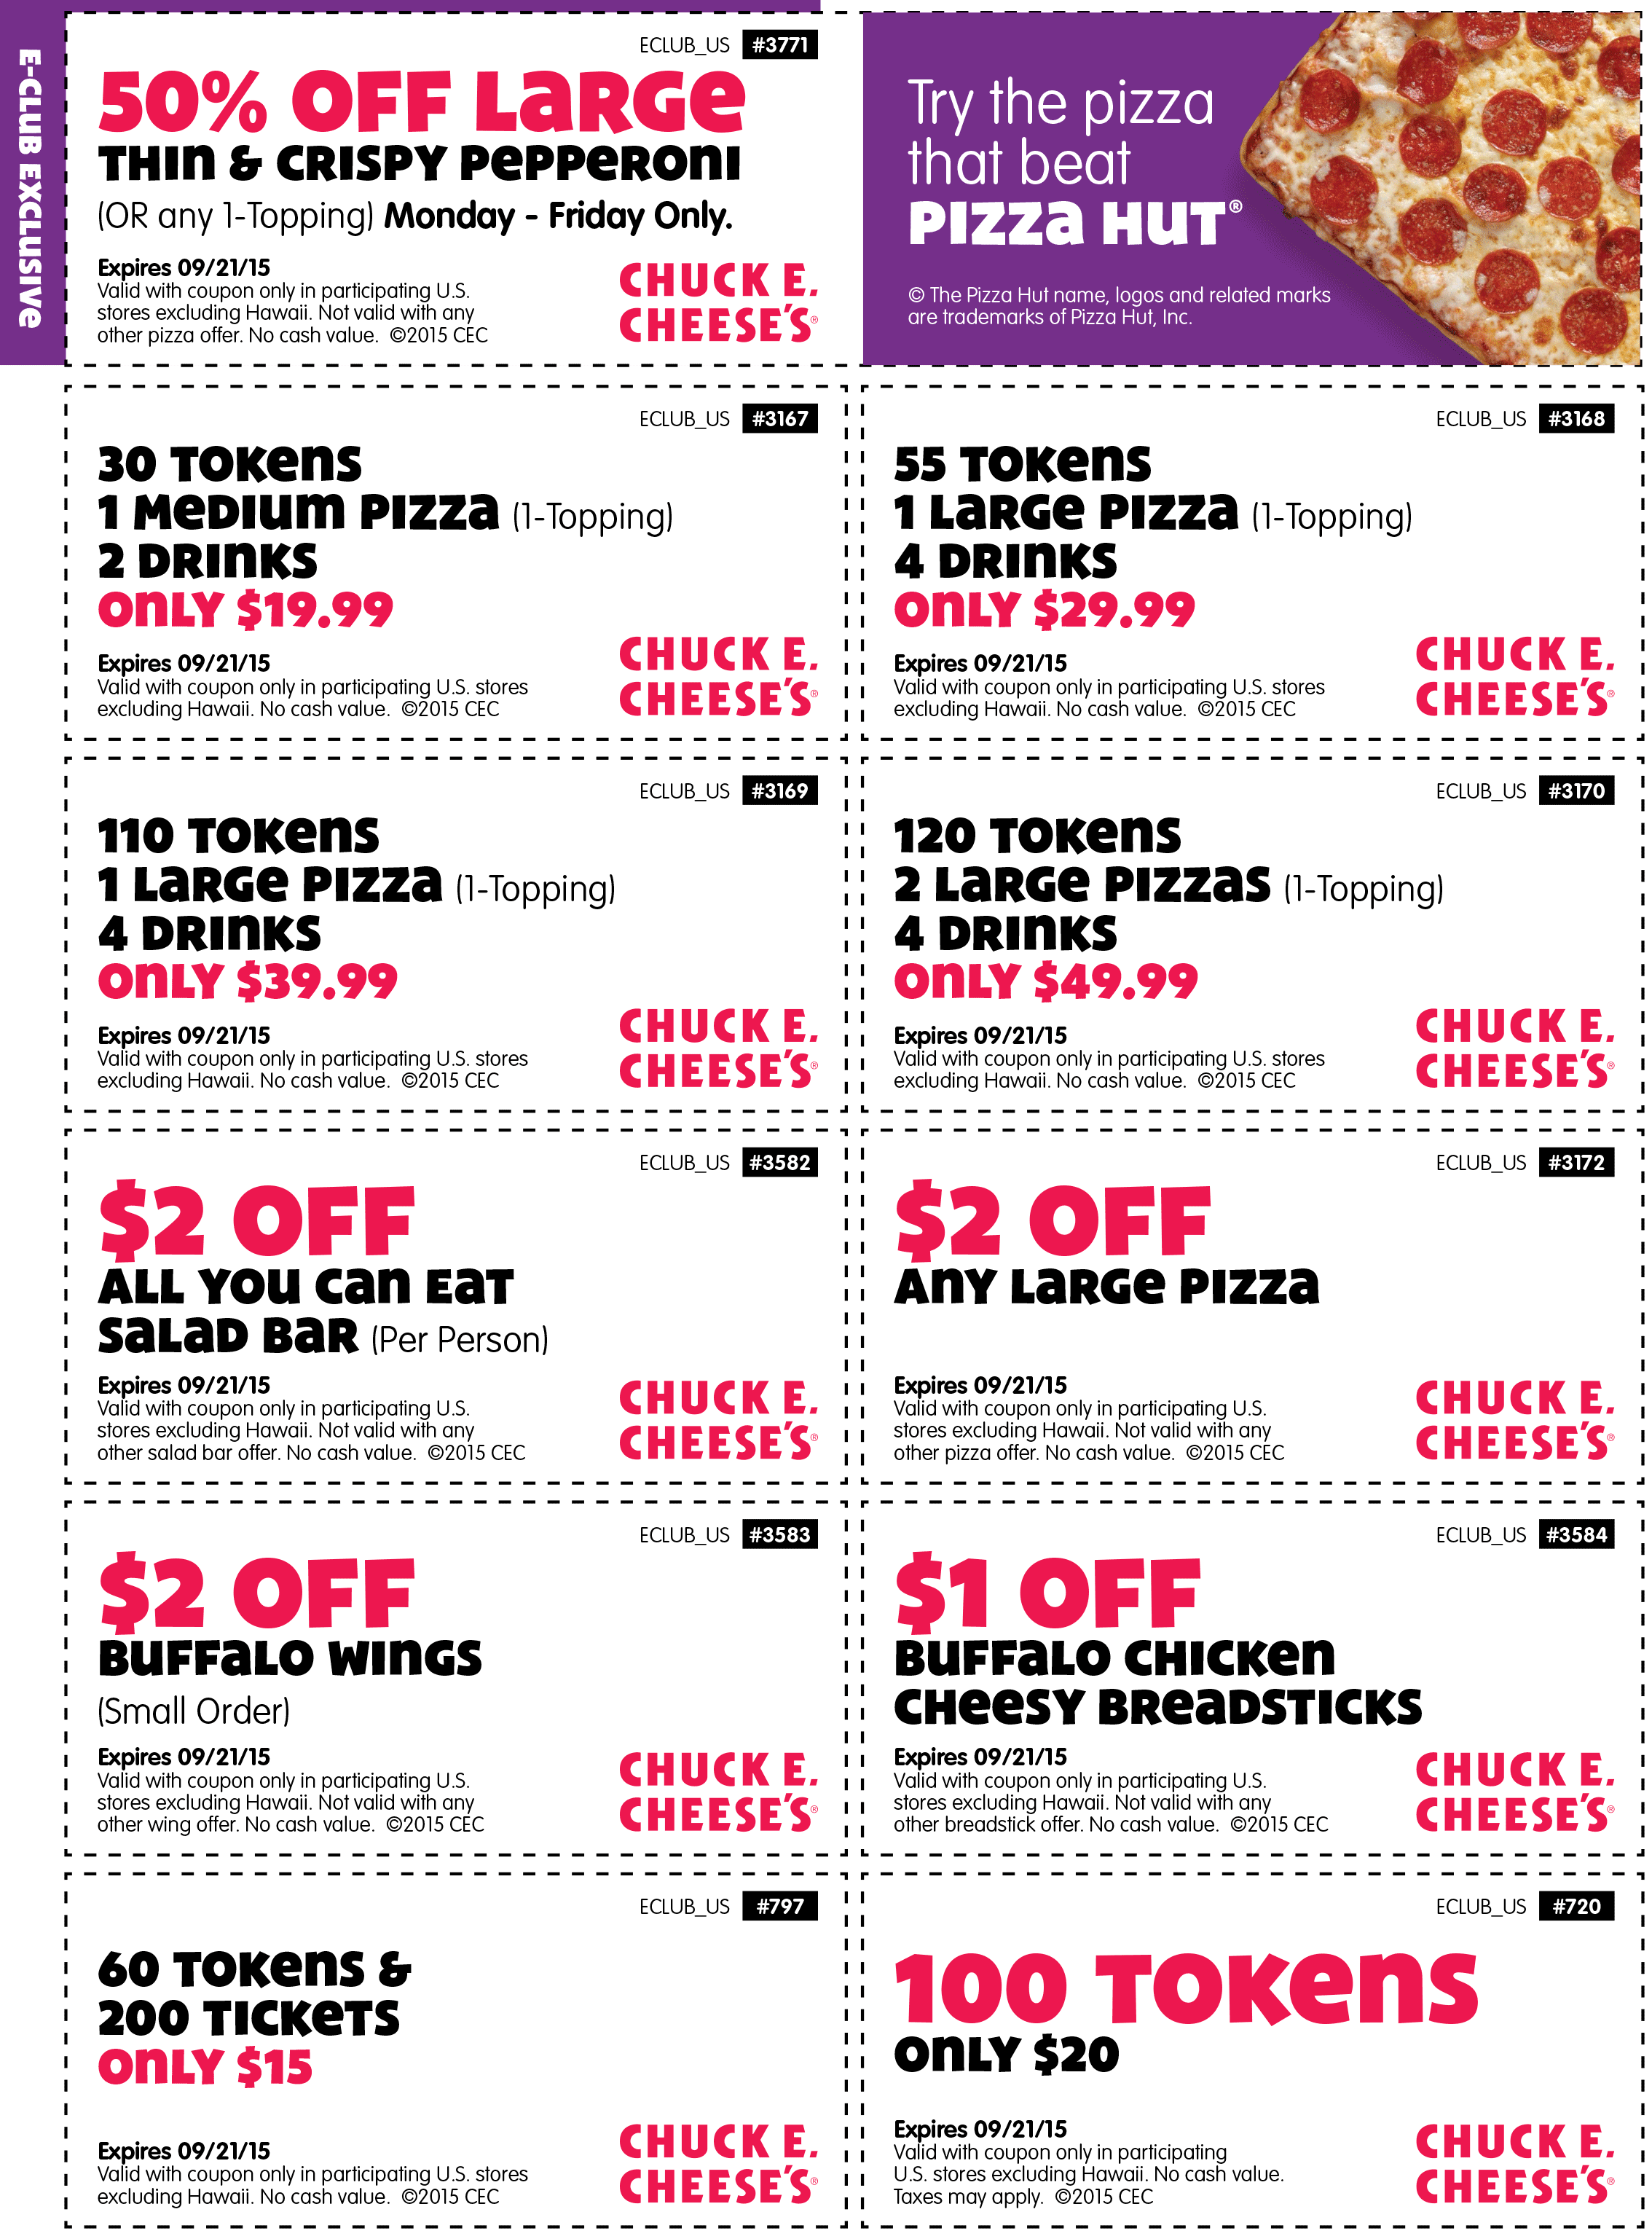 Chuck E. Cheese Coupons - 100 tokens for $20, 50% off pizza & more at ...